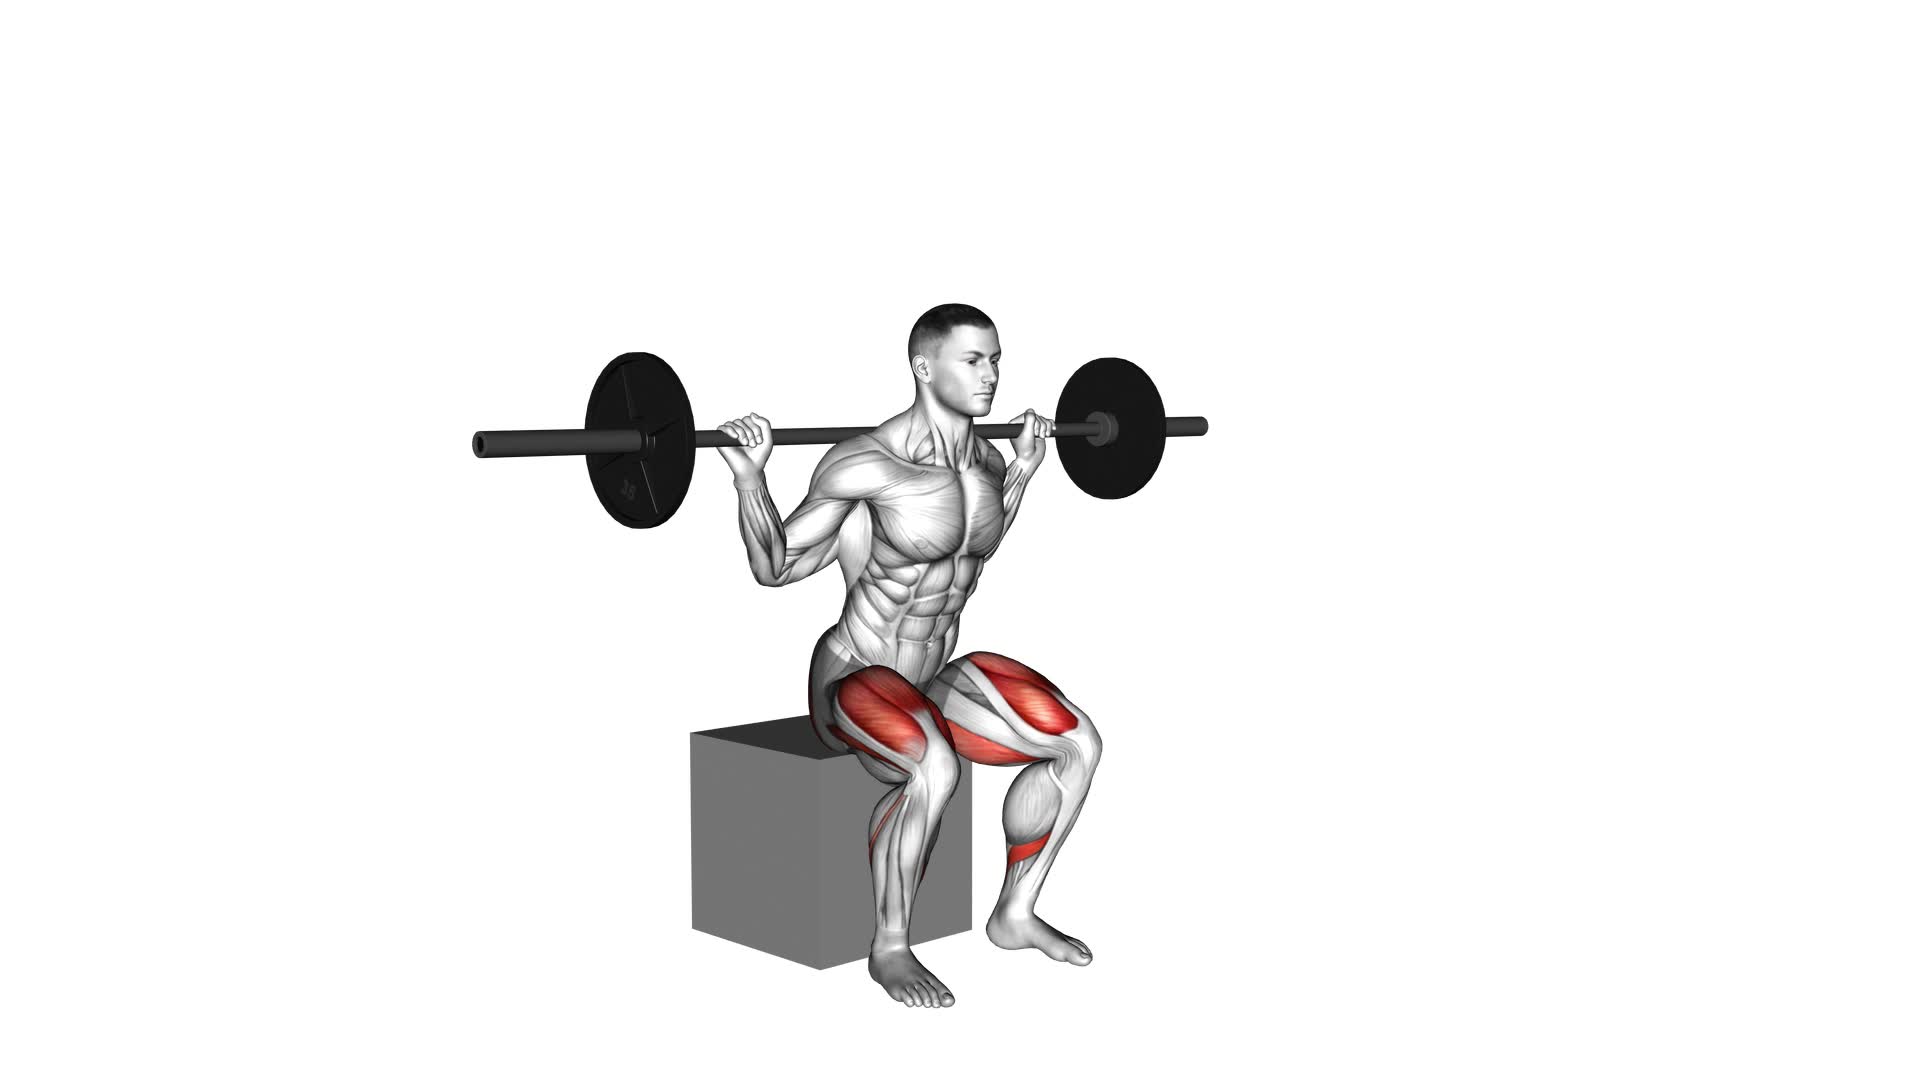 Barbell Box Squat - Video Exercise Guide & Tips